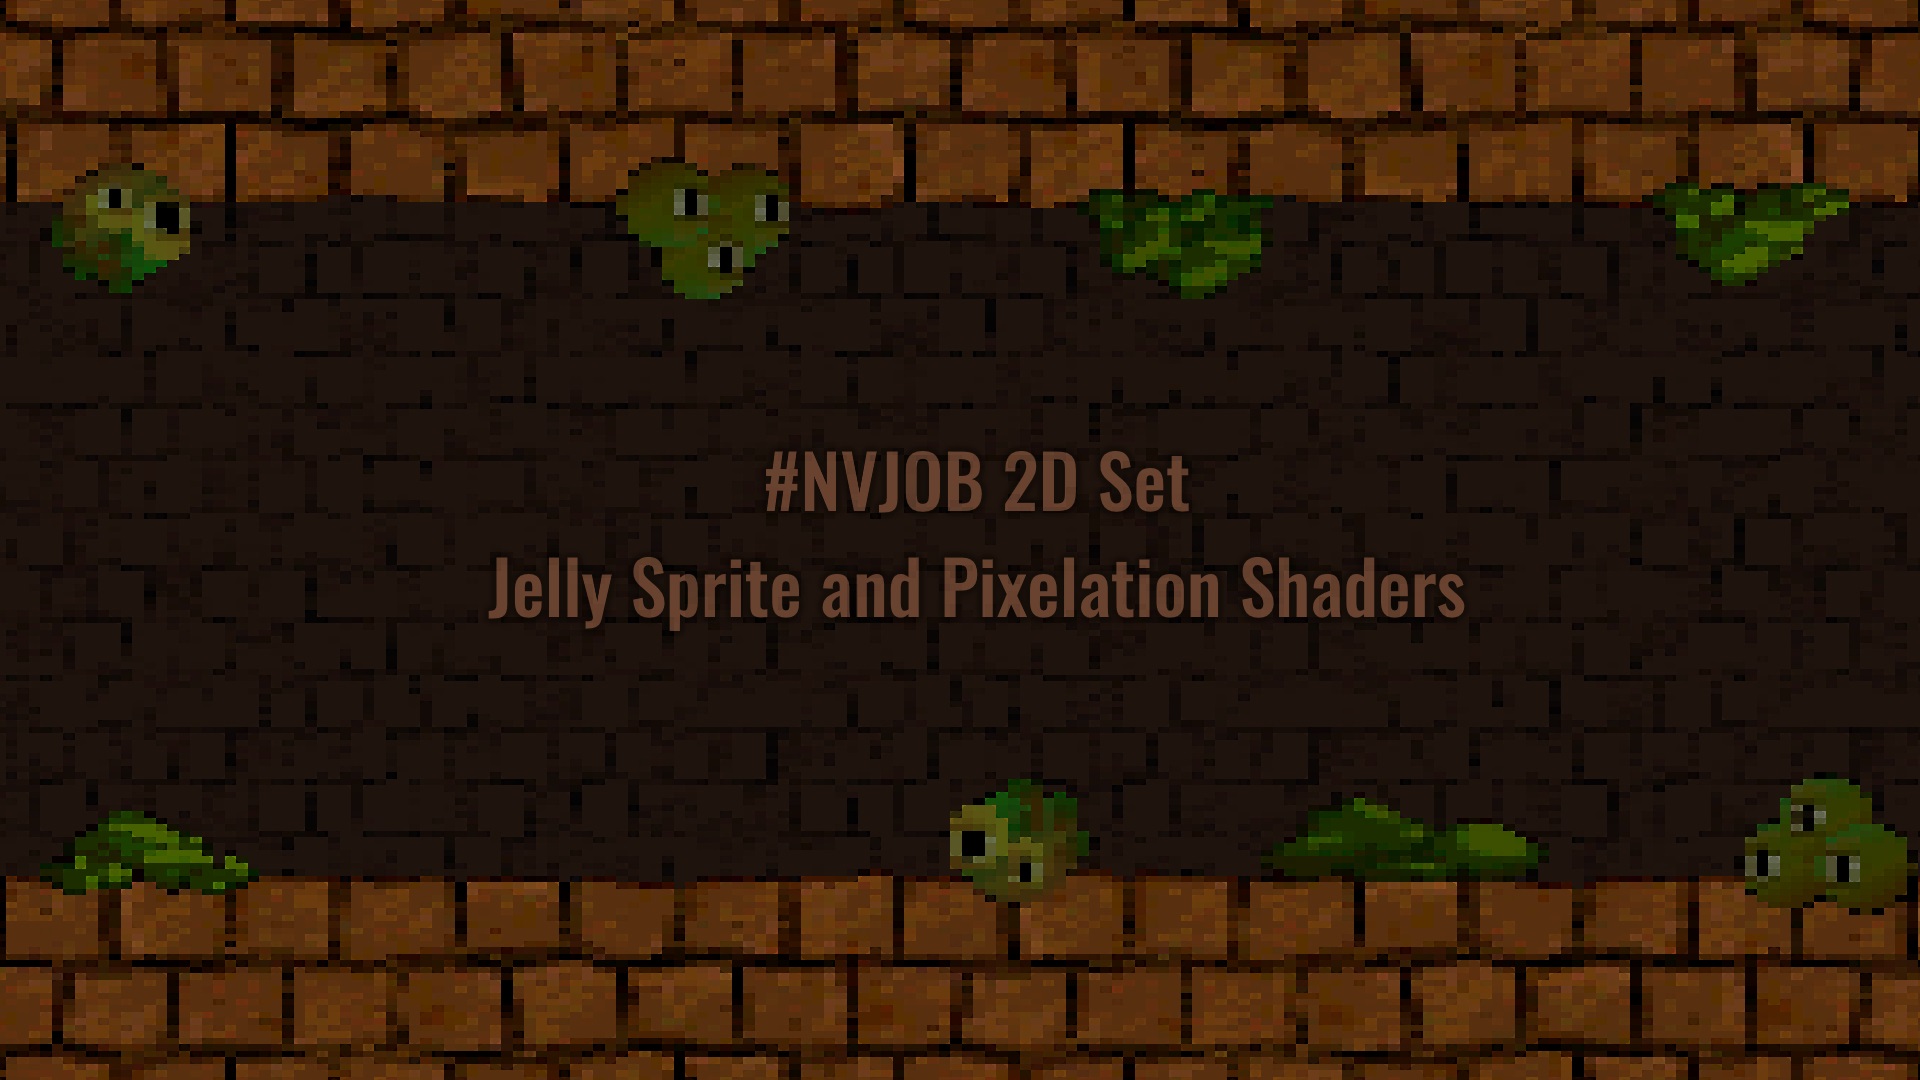 >2D Set (Jelly Sprite and Pixelation Shaders). Free Unity Asset.